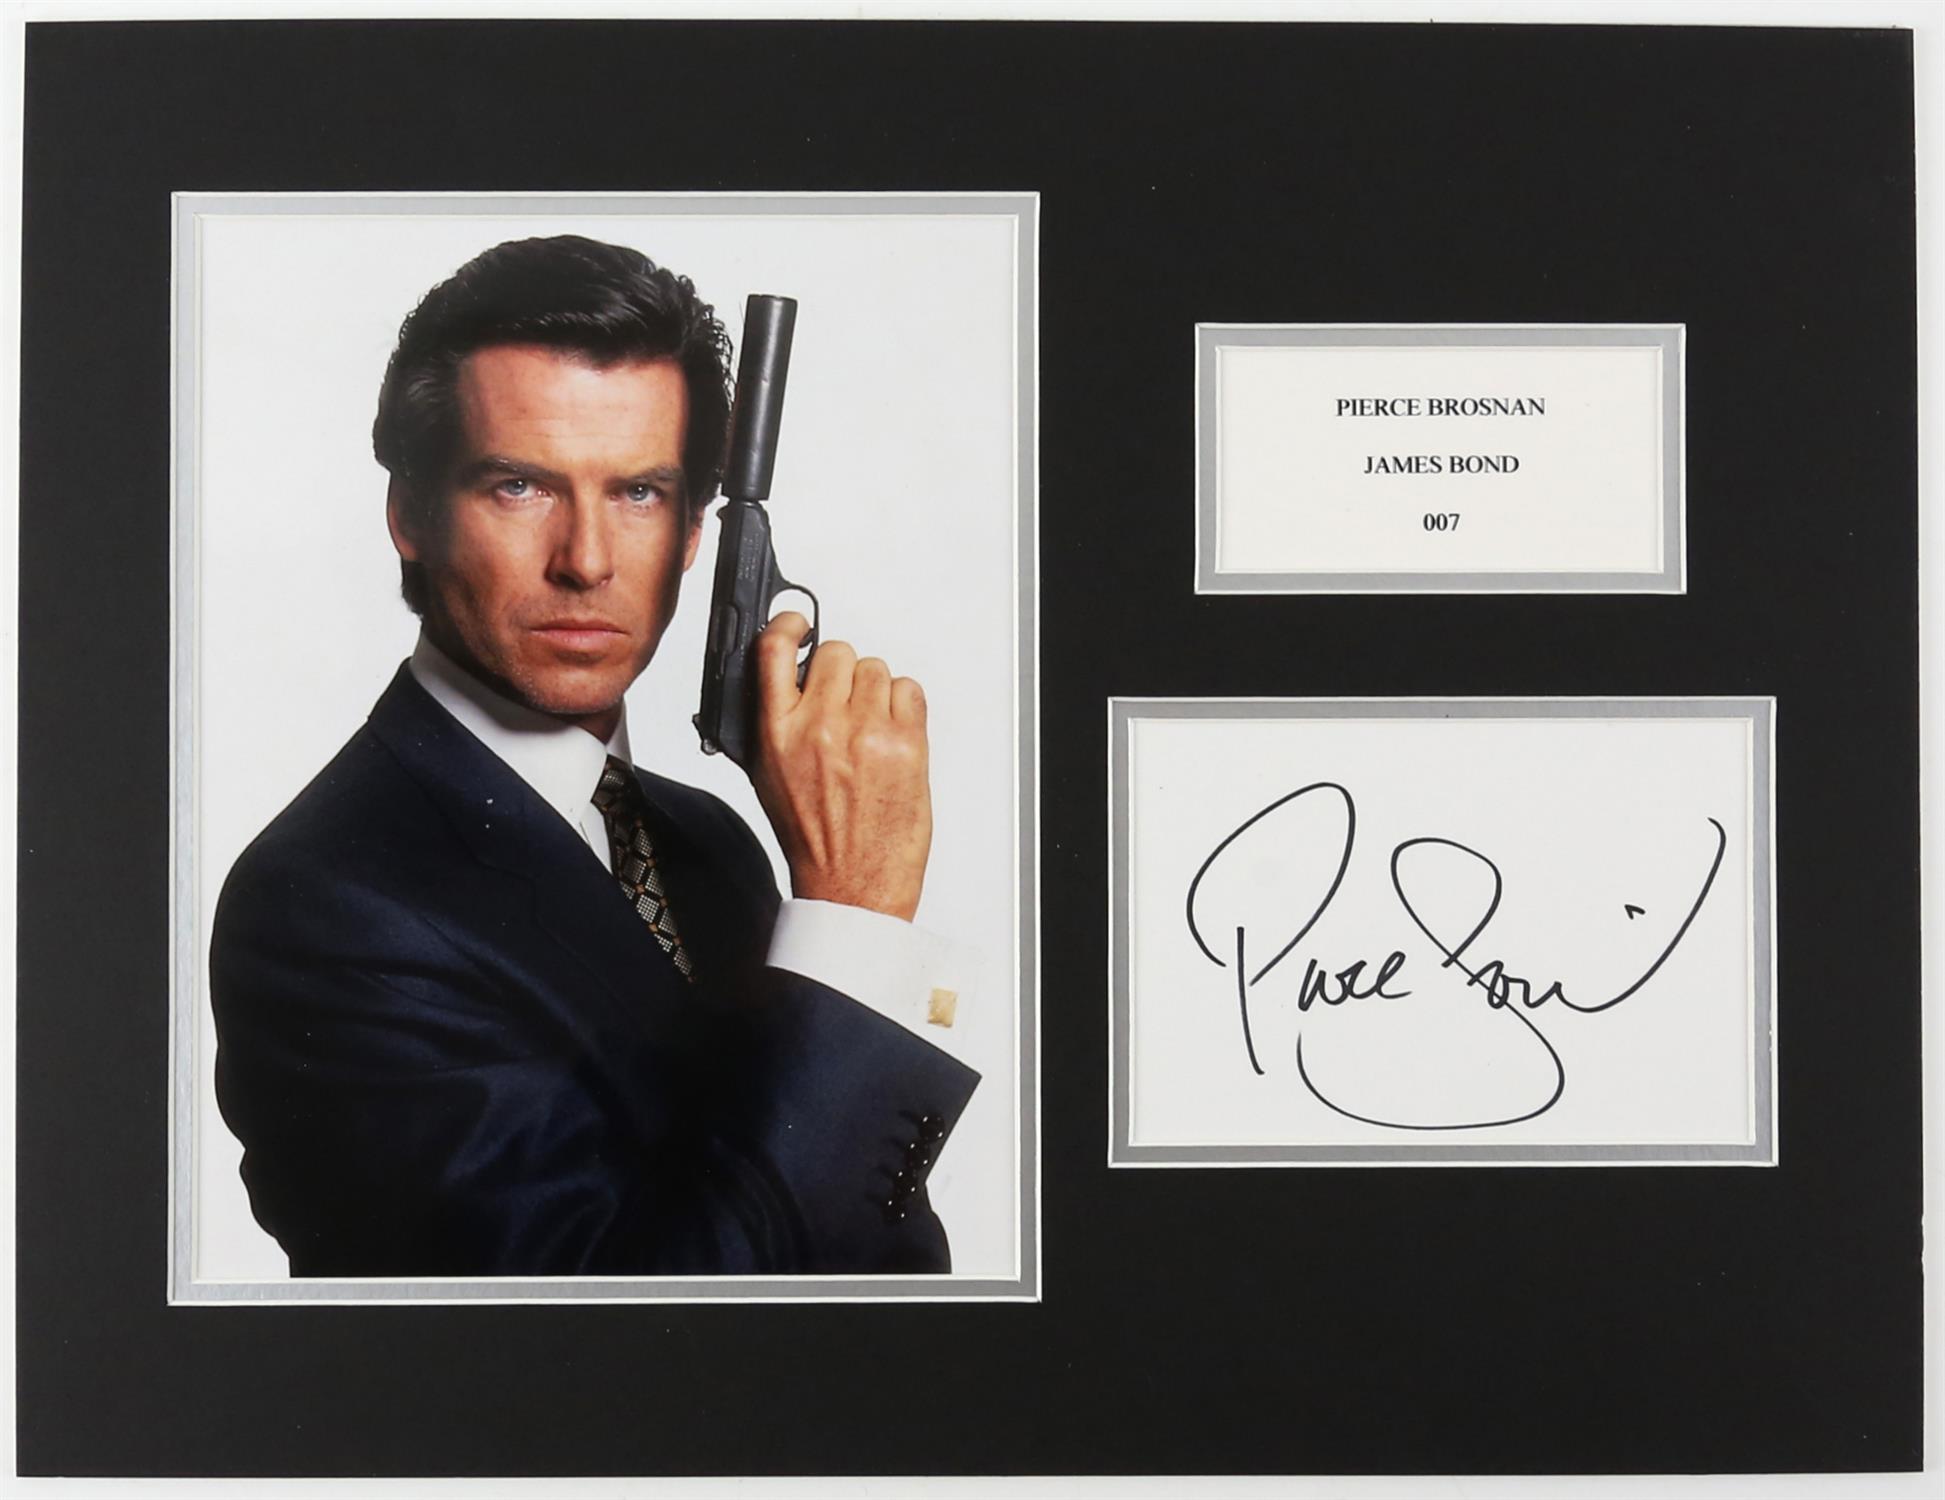 James Bond - Pierce Brosnan signed 007 mounted display, 33 x 43cm and a George Lazenby limited